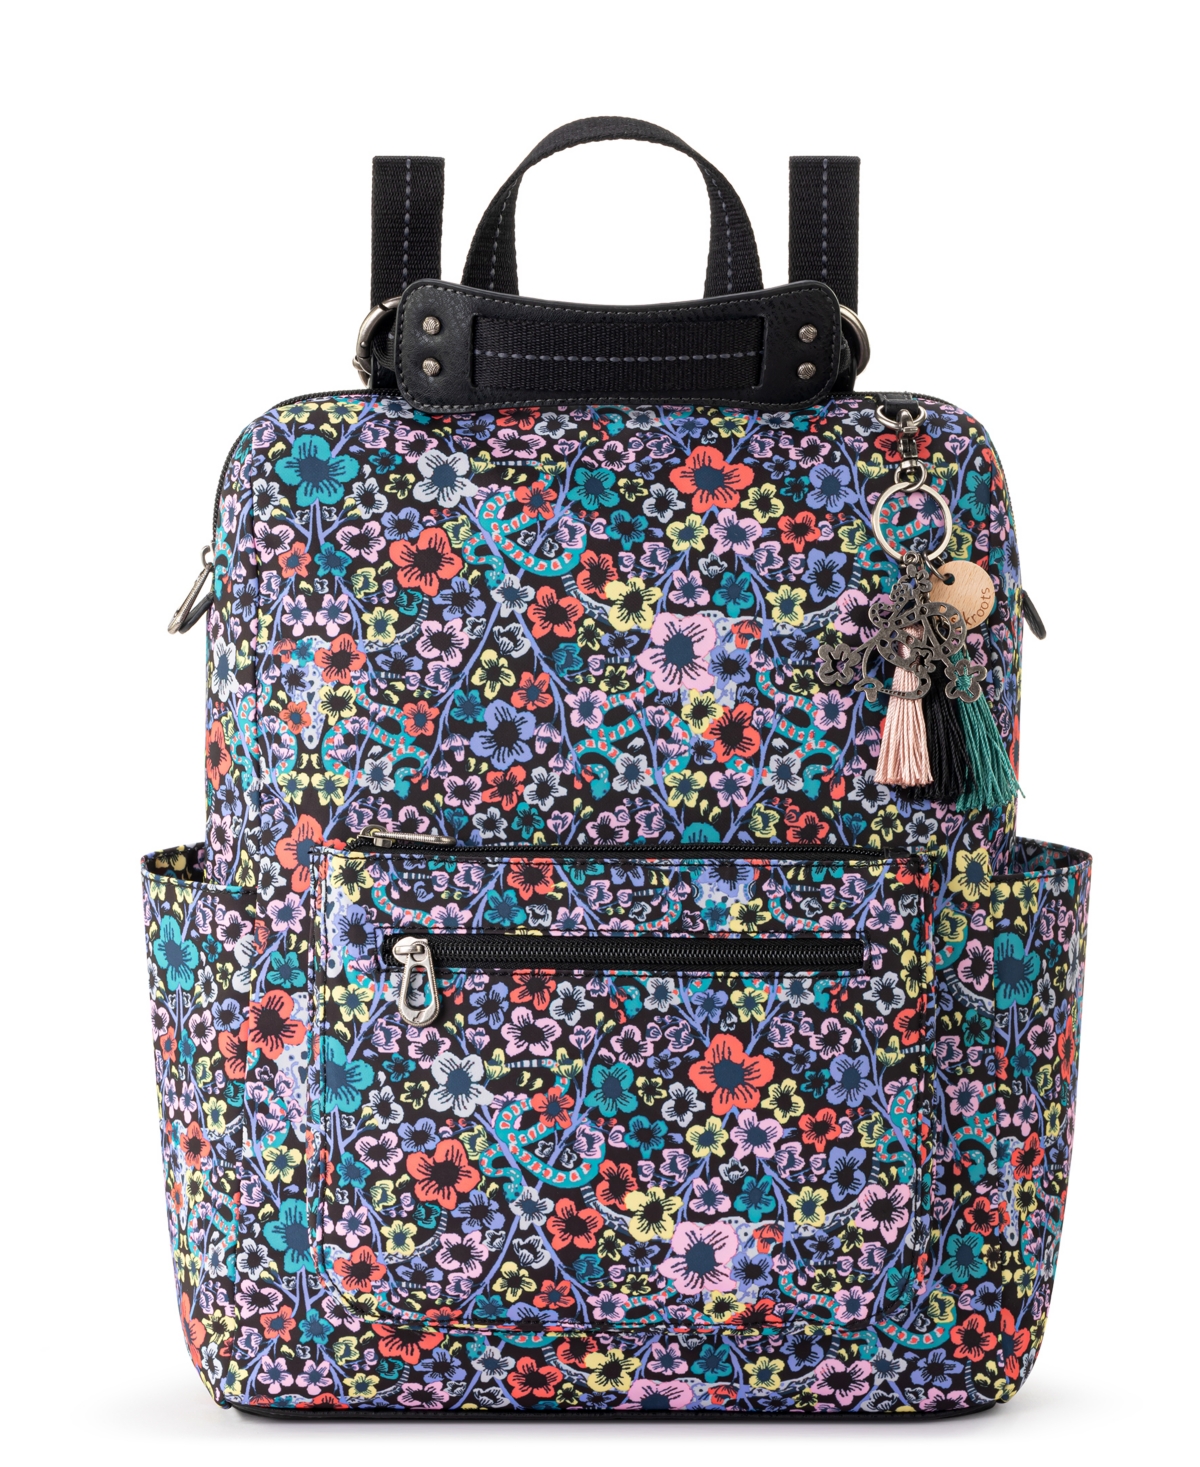 Recycled Loyola Convertible Backpack - Pink Mojave Canyon